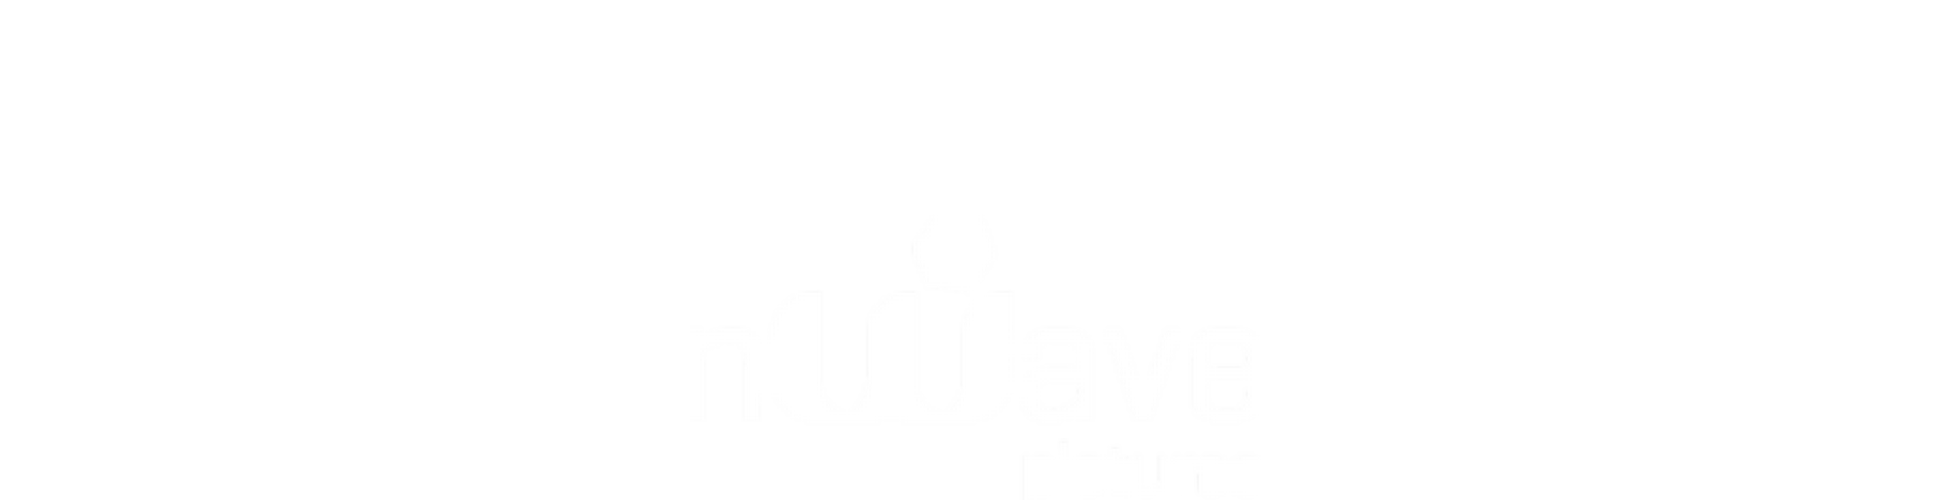 nWave Pictures represented by a white logo